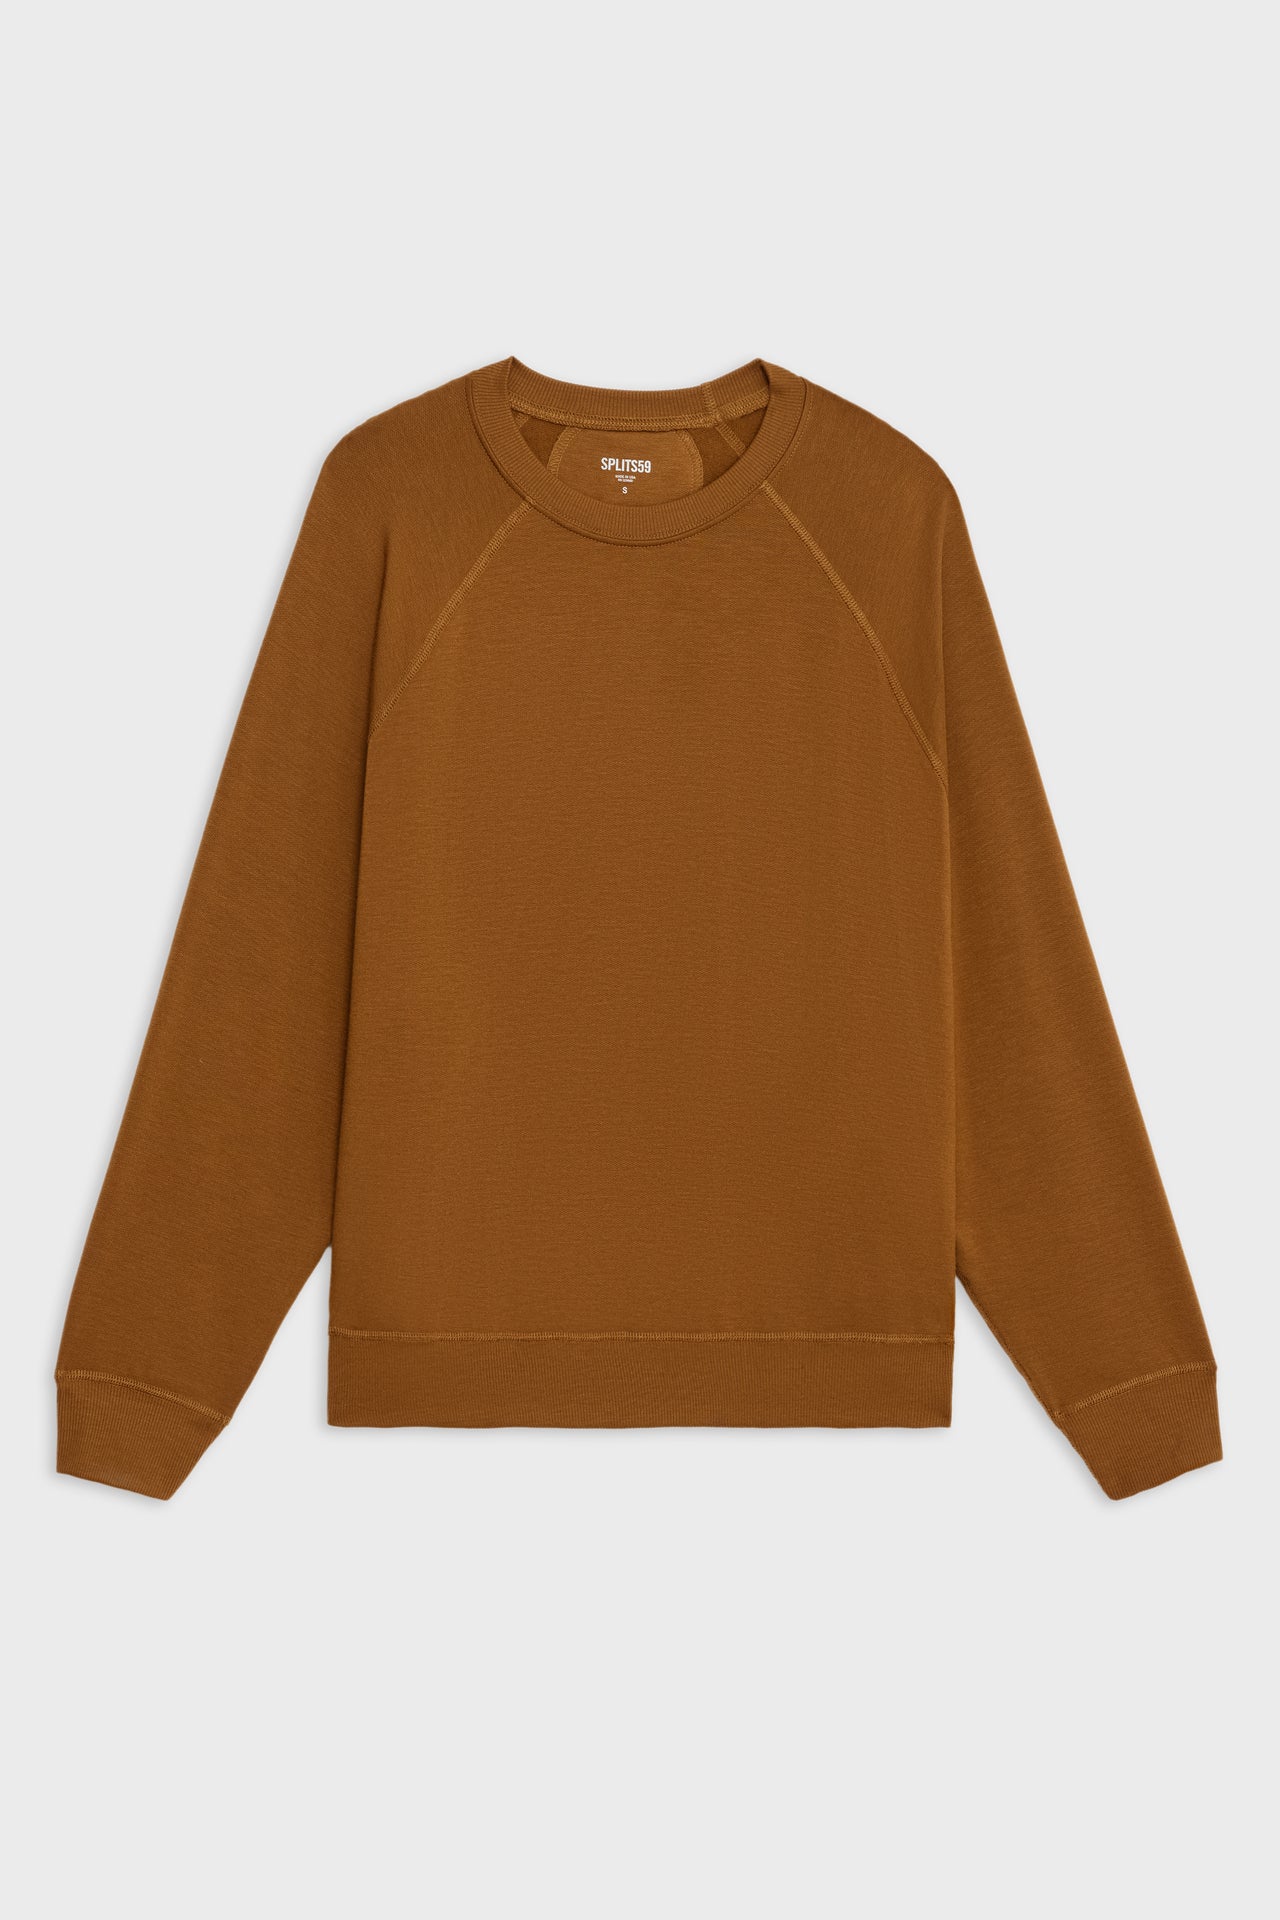 Flat view of girl wearing redish brown sweatshirt with visible stitching and ribbed hem